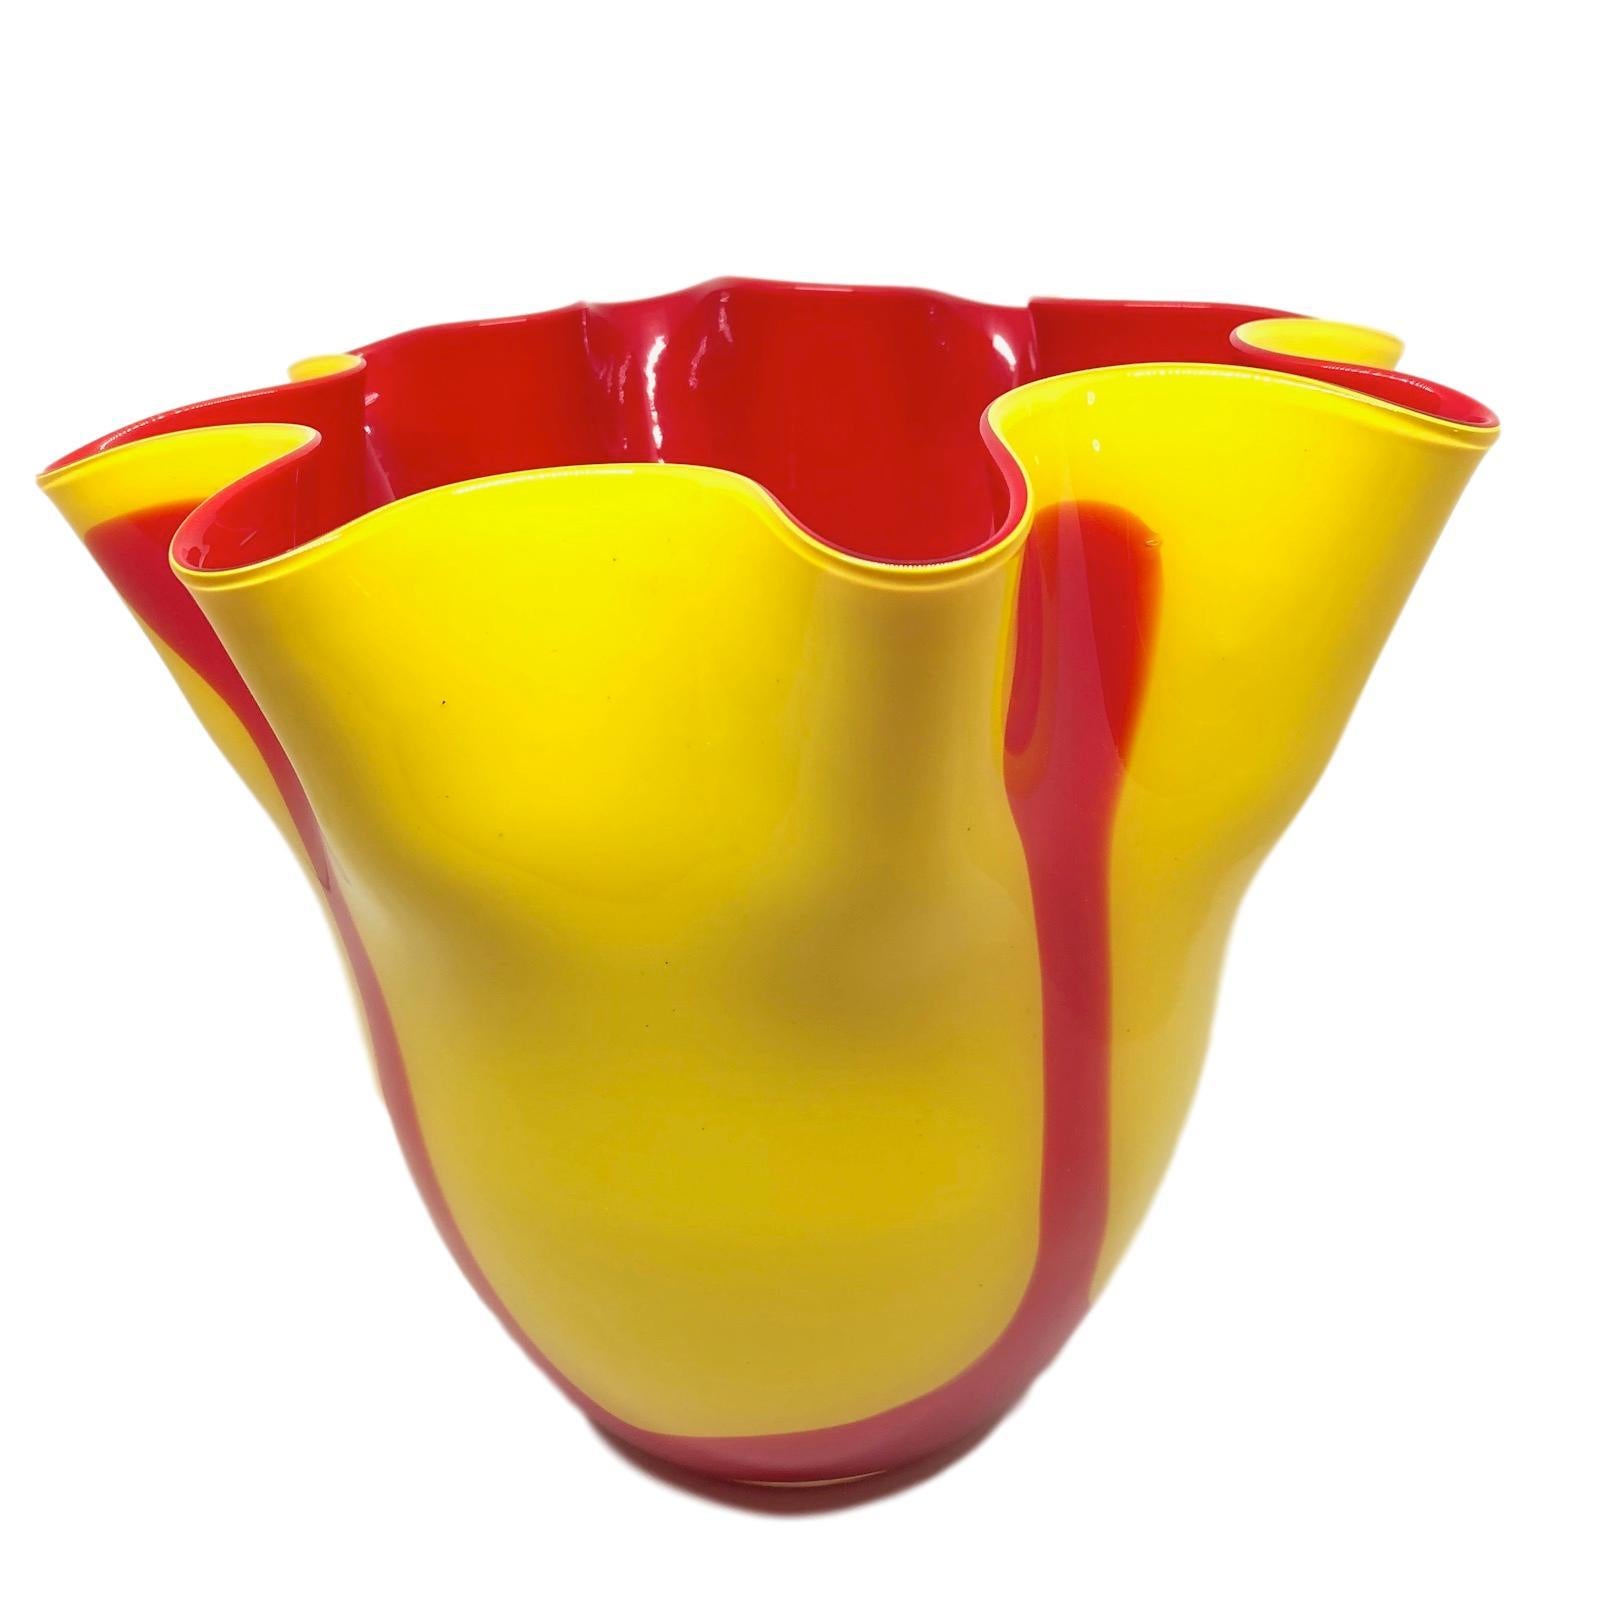 red and yellow glass vase